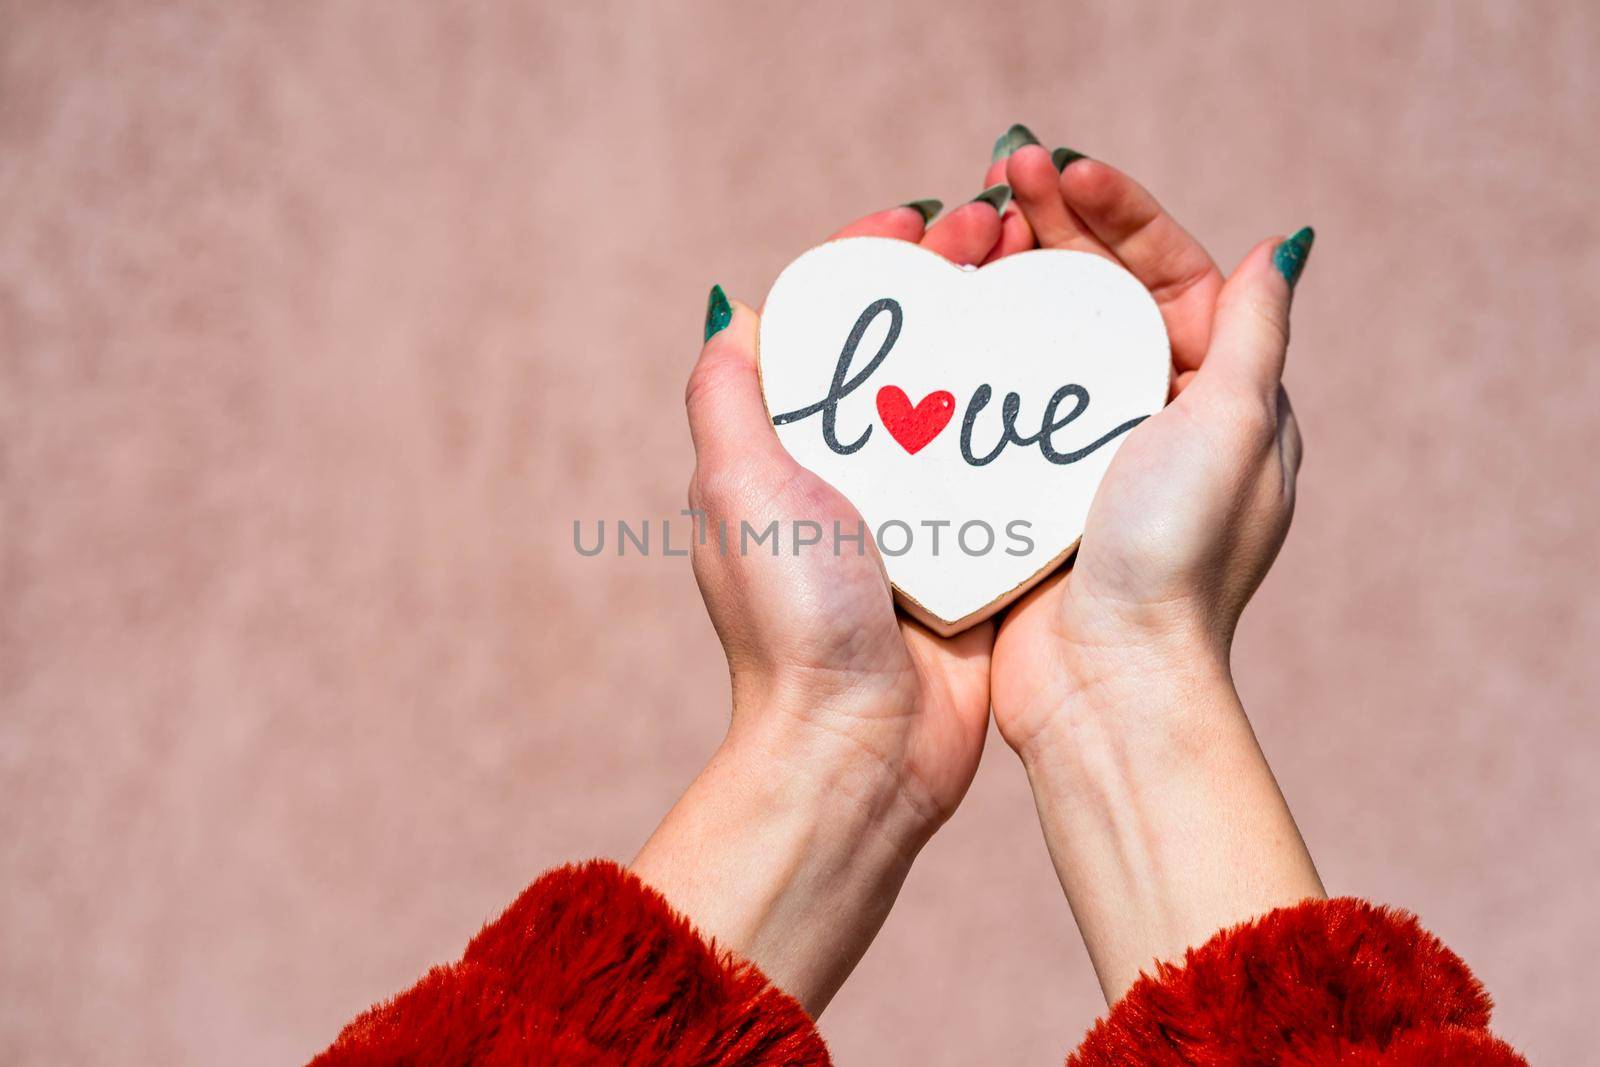 Hands holding heart with love message text.